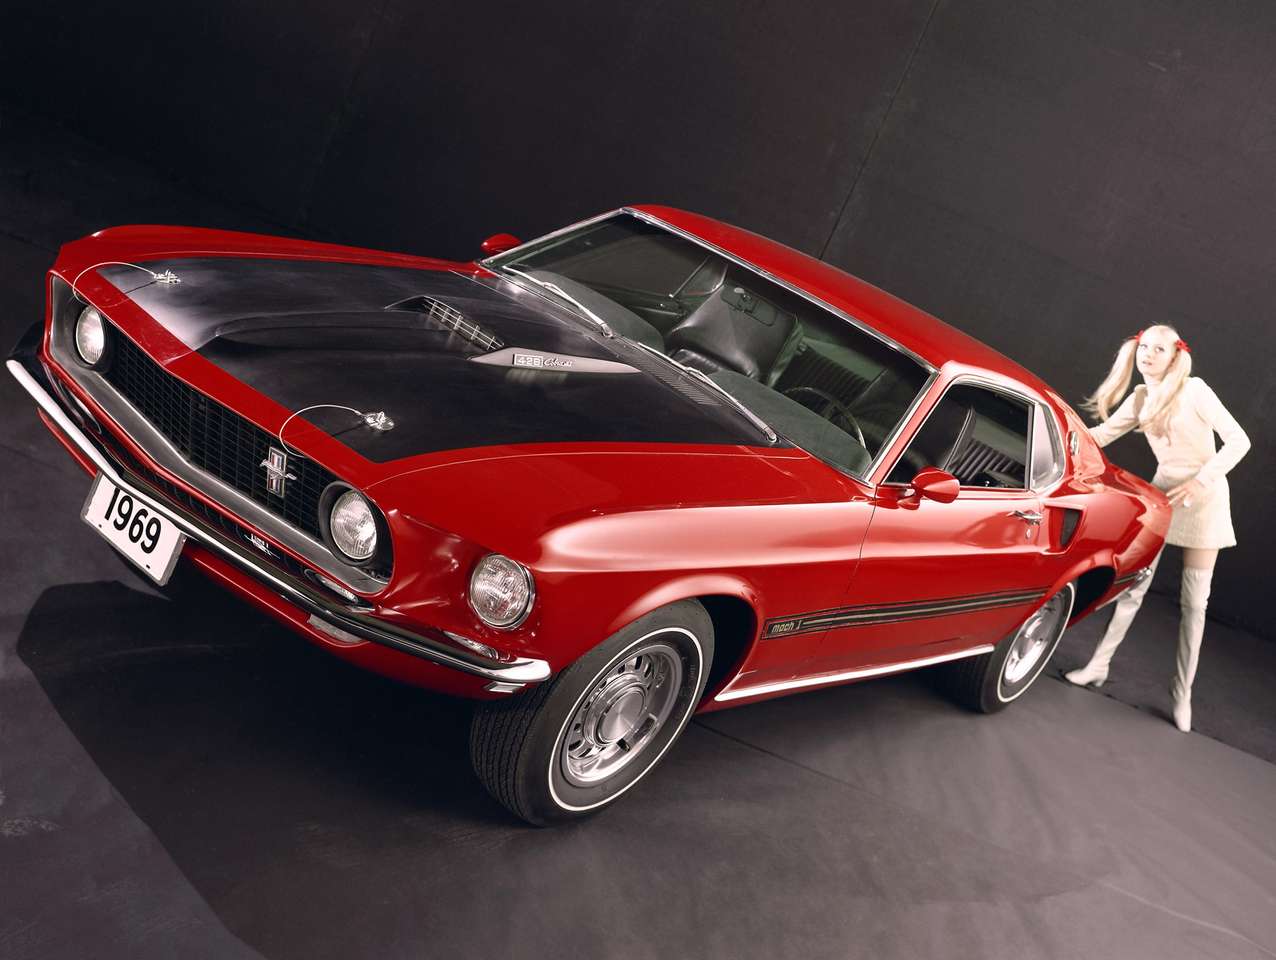 1969 FORD Mustang Mach 1 428 Super Cobra Jet Online-Puzzle